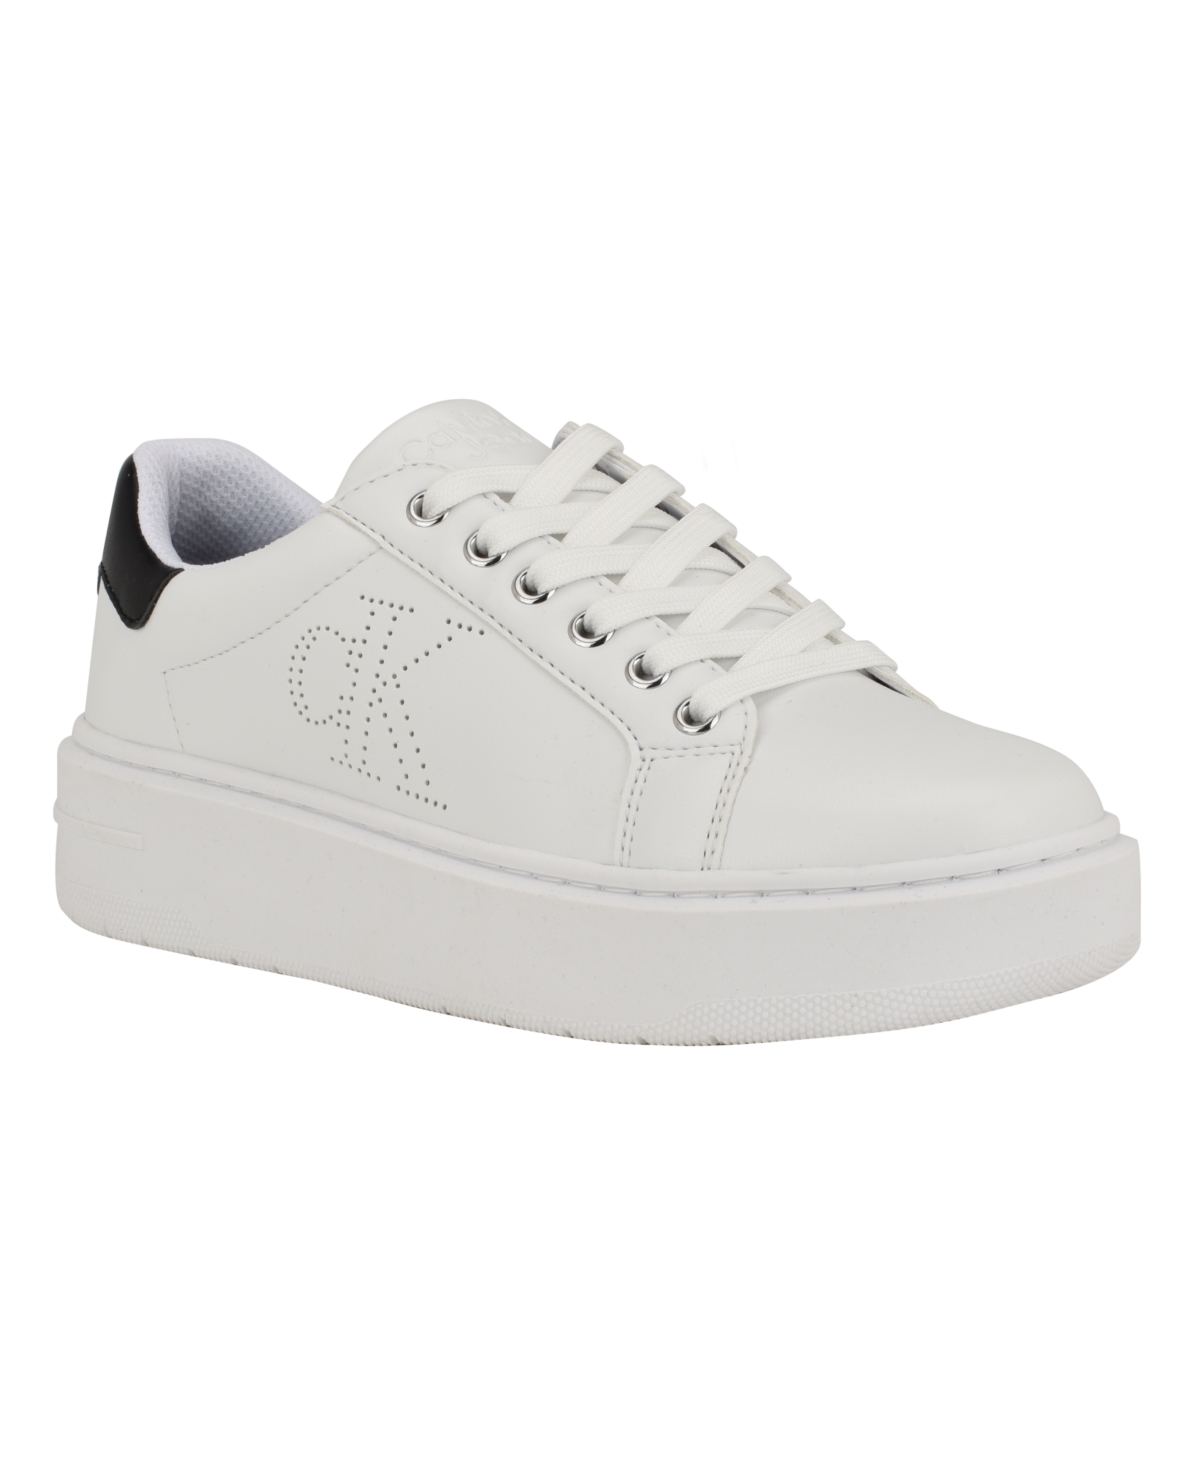 Calvin Klein Women's Daili Lace-up Platform Casual Sneakers In White - Faux Leather